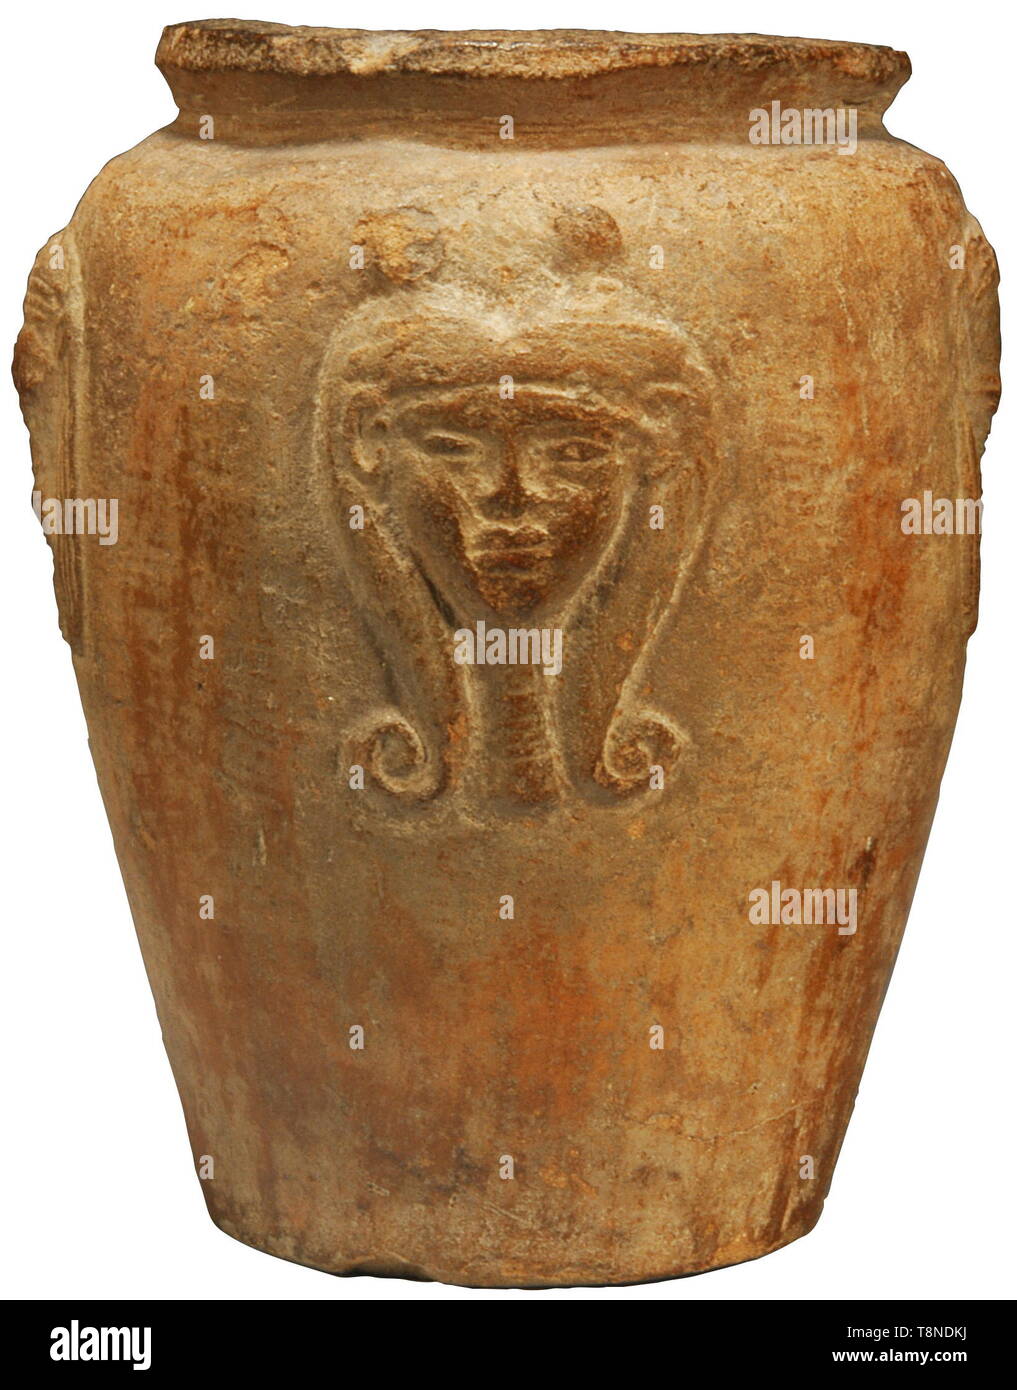 An Egyptian New Kingdom pottery jar, XIXth Dynasty, 1295 - 1070 BC Molded with four heads of deities imitating amulets, including two heads of Hathor, her hair centrally parted and terminating in curls, wearing a collar on her long neck alternating with the cow-headed Hathor, wearing a similar wig. Height 11 cm. Provenance: English private collection, Bonham's, London, May 2008, lot 57. USA-lot, see page 5. historic, historical, ancient world, Additional-Rights-Clearance-Info-Not-Available Stock Photo